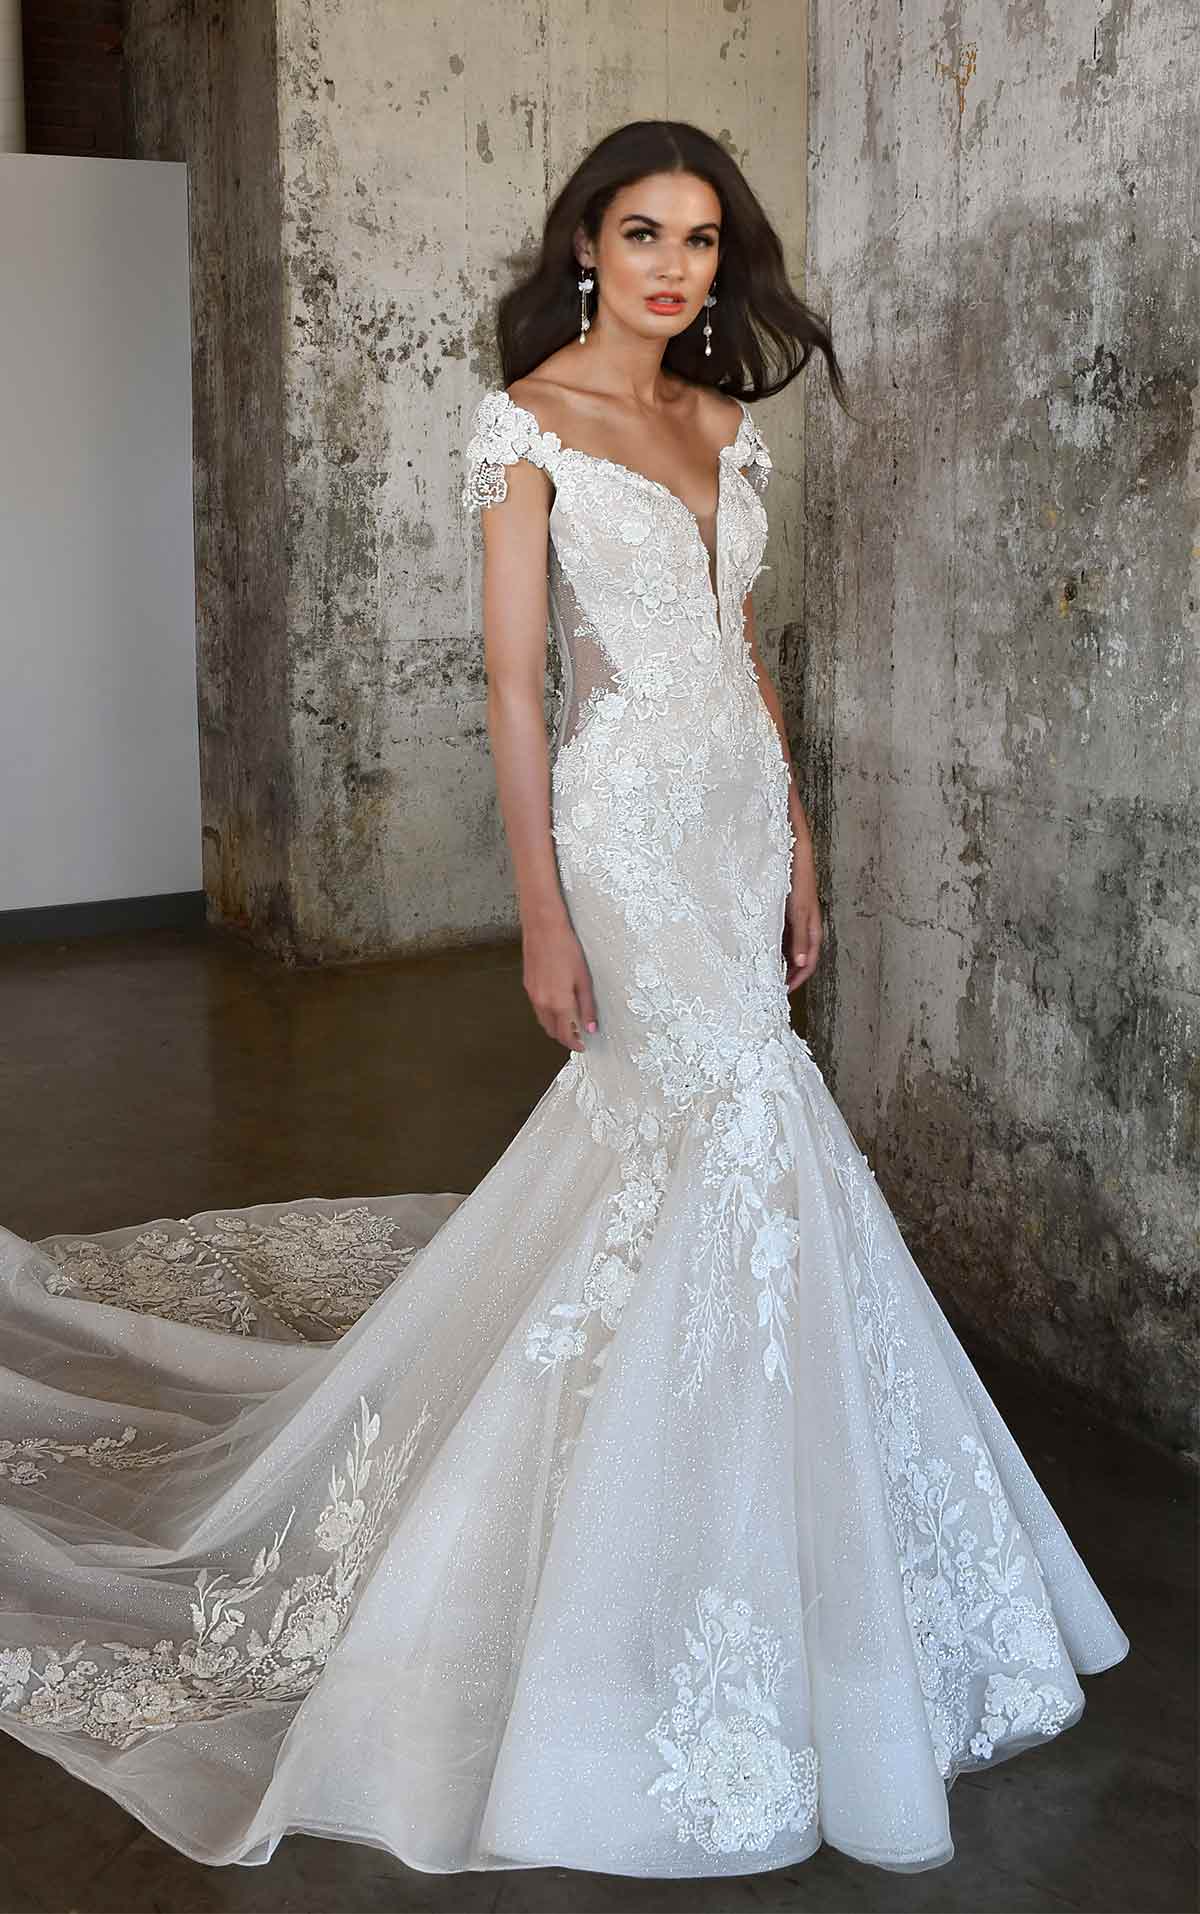 GLAMOROUS FIT-AND-FLARE WEDDING DRESS ...